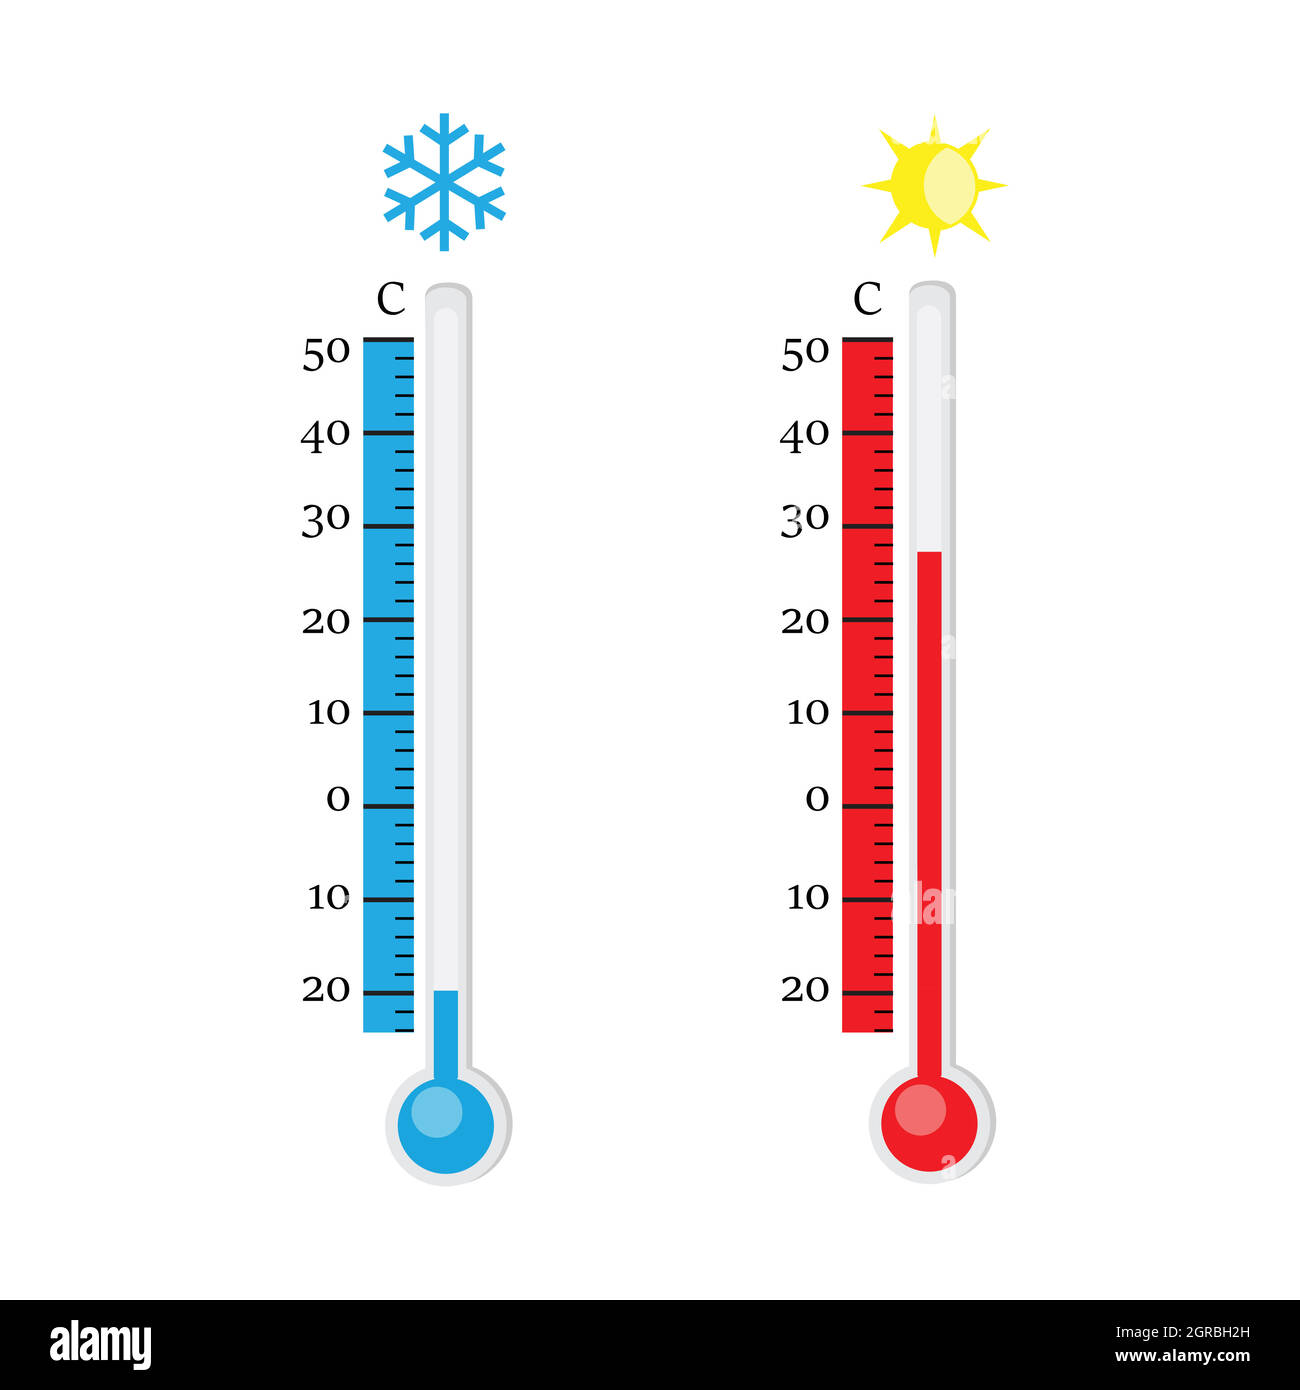 https://c8.alamy.com/comp/2GRBH2H/thermometer-icon-celsius-measuring-hot-and-cold-temperature-vector-2GRBH2H.jpg